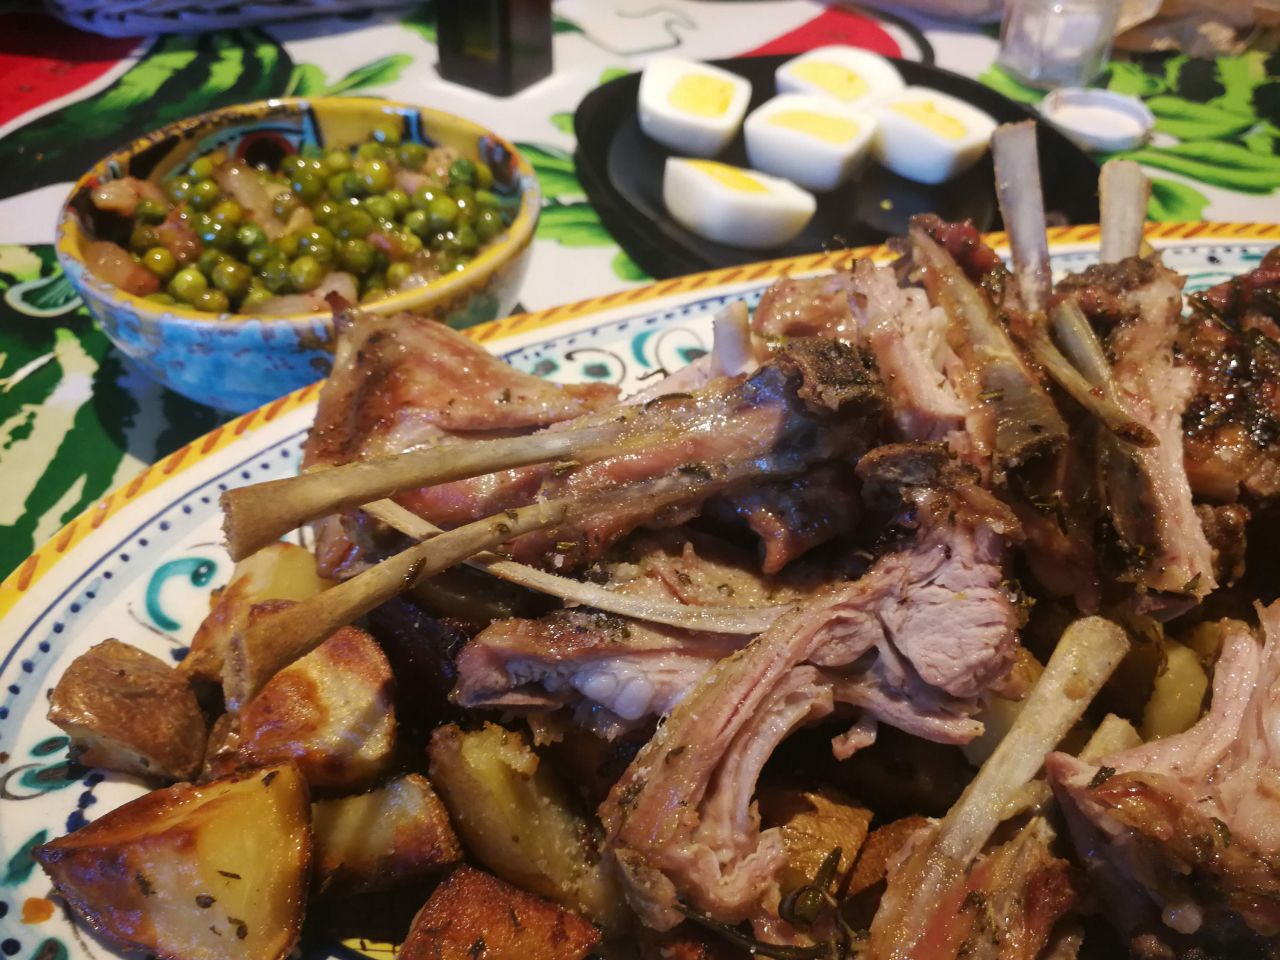 Lamb chops are traditionally served on Easter in Italy. In Florence, locals serve tiny lamb chops called scottadito, meaning finger-burners, because you burn yourself picking up the tiny bones to eat them. Behind the lamb is roasted potatoes, peas with pancetta and hard-boiled eggs.